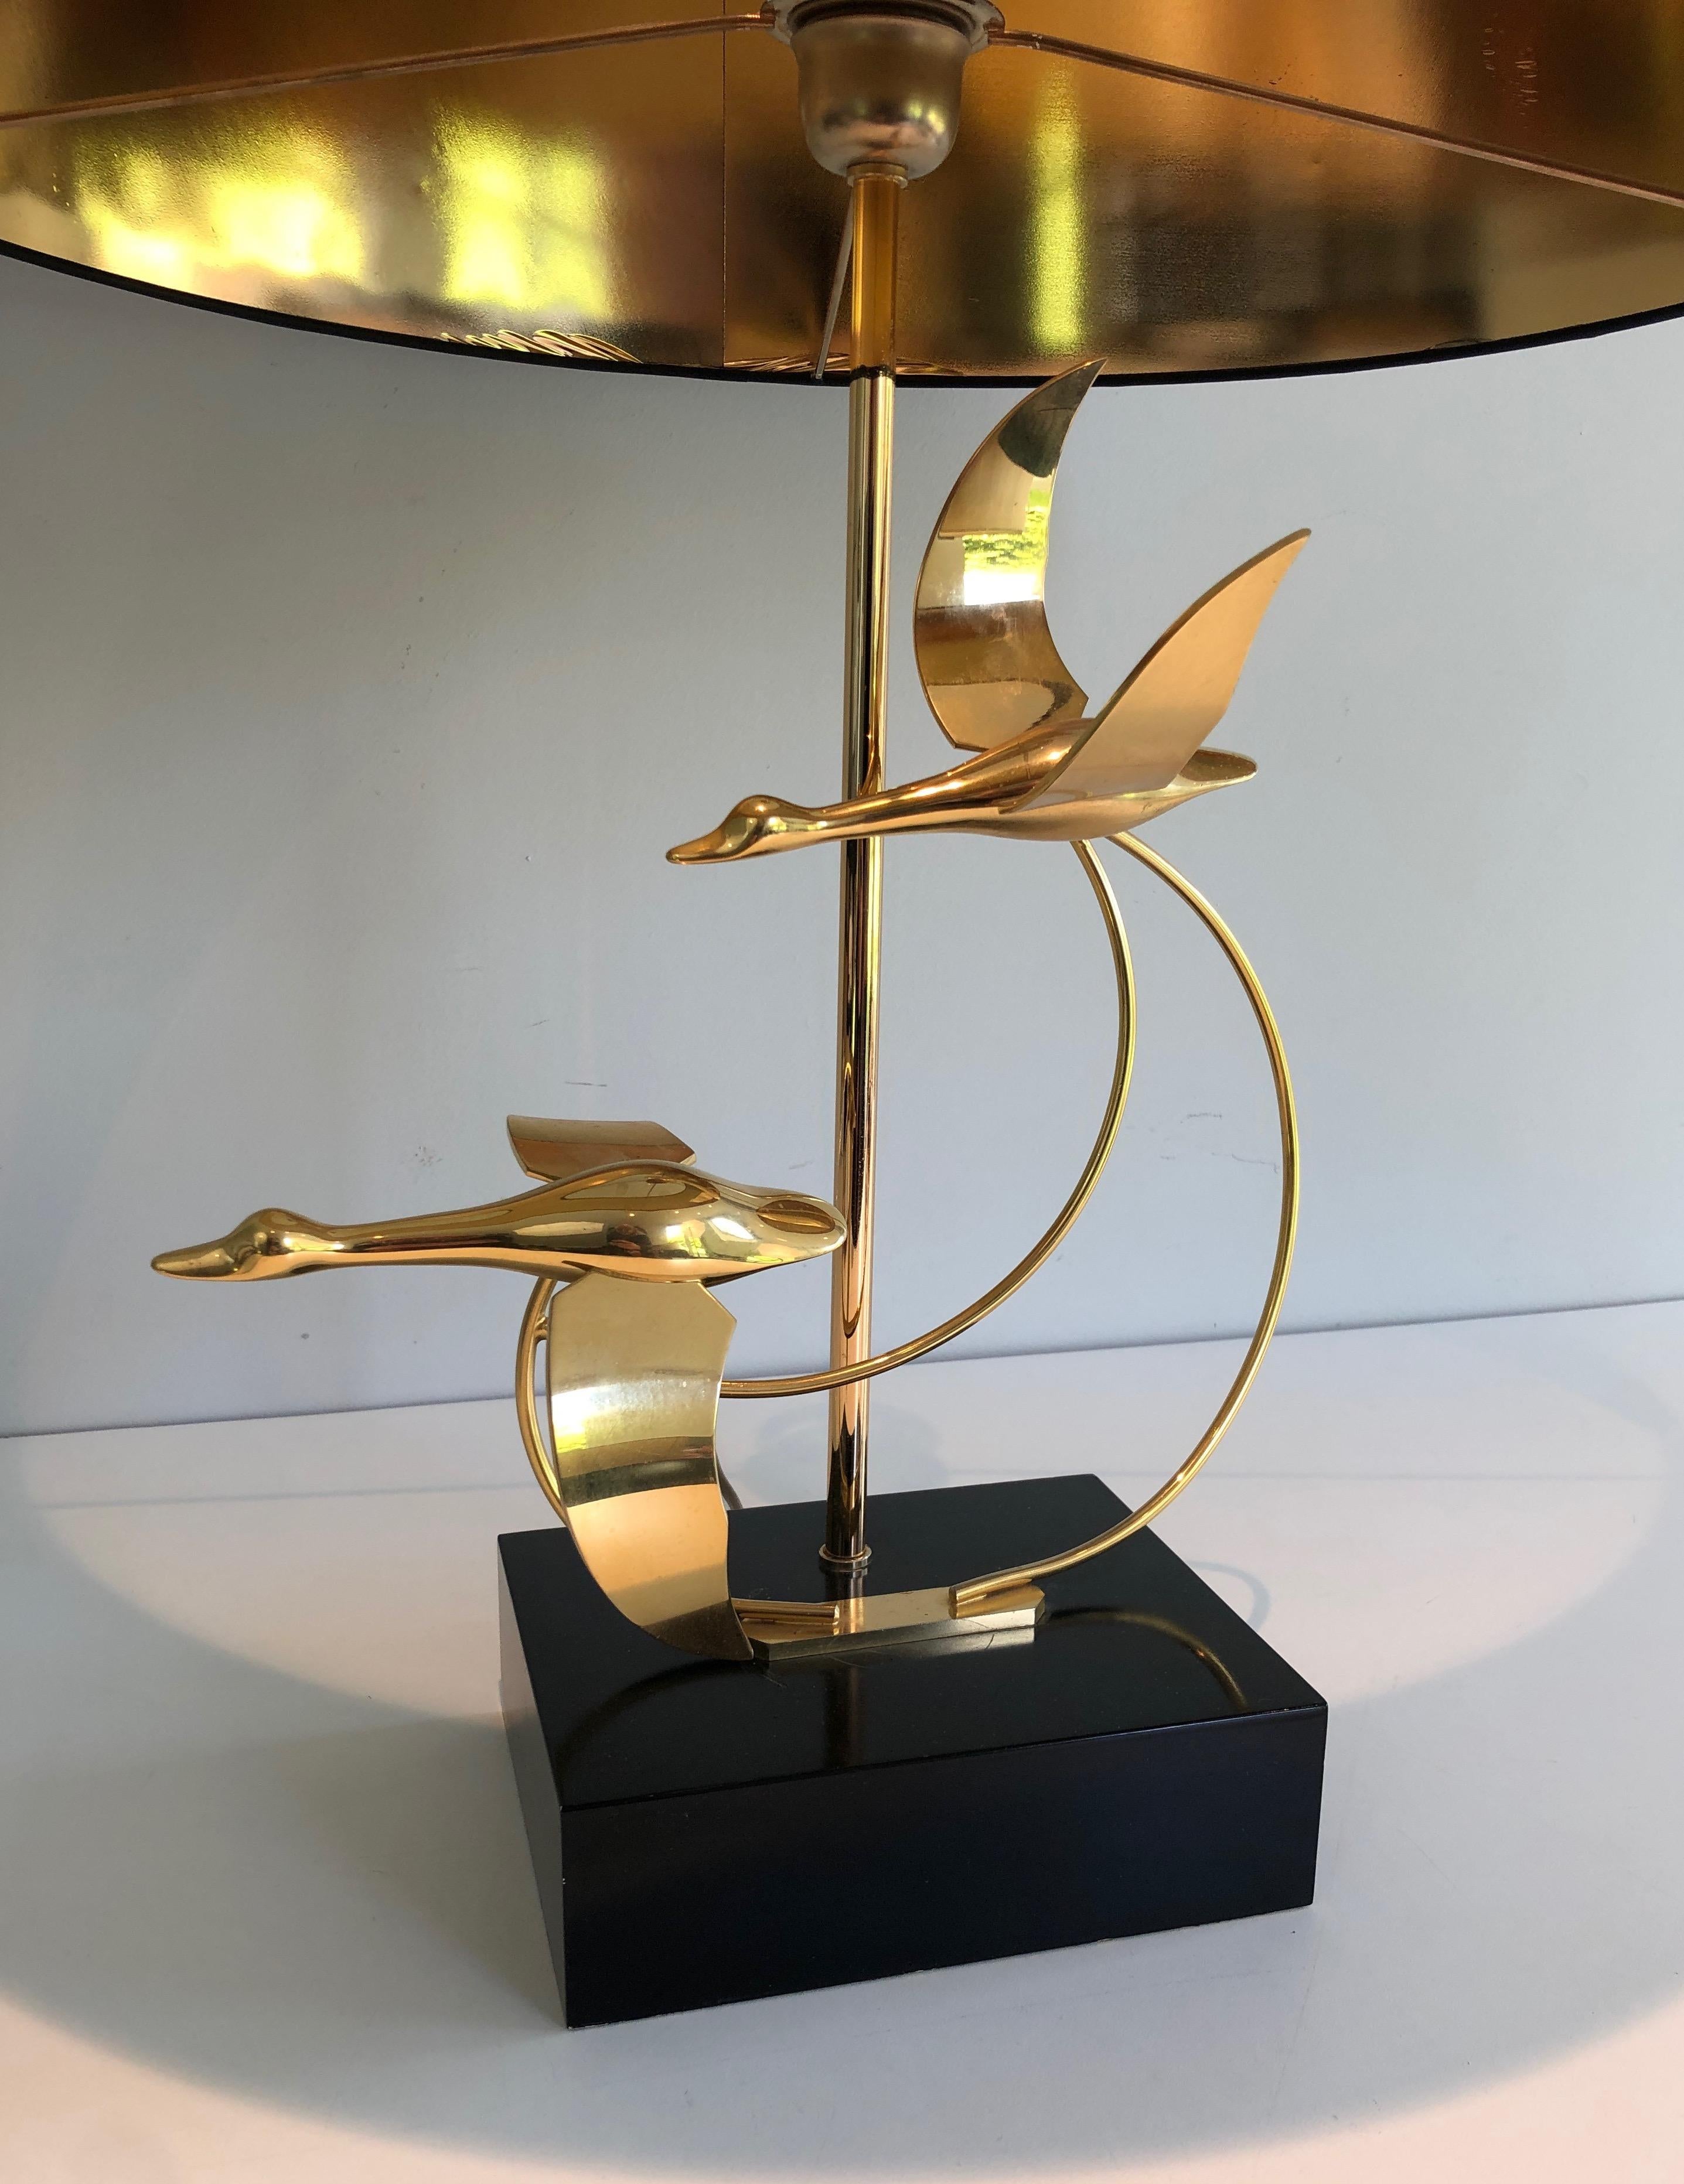 Flock of Wild Geese Brass Table Lamp, French, circa 1970 For Sale 9